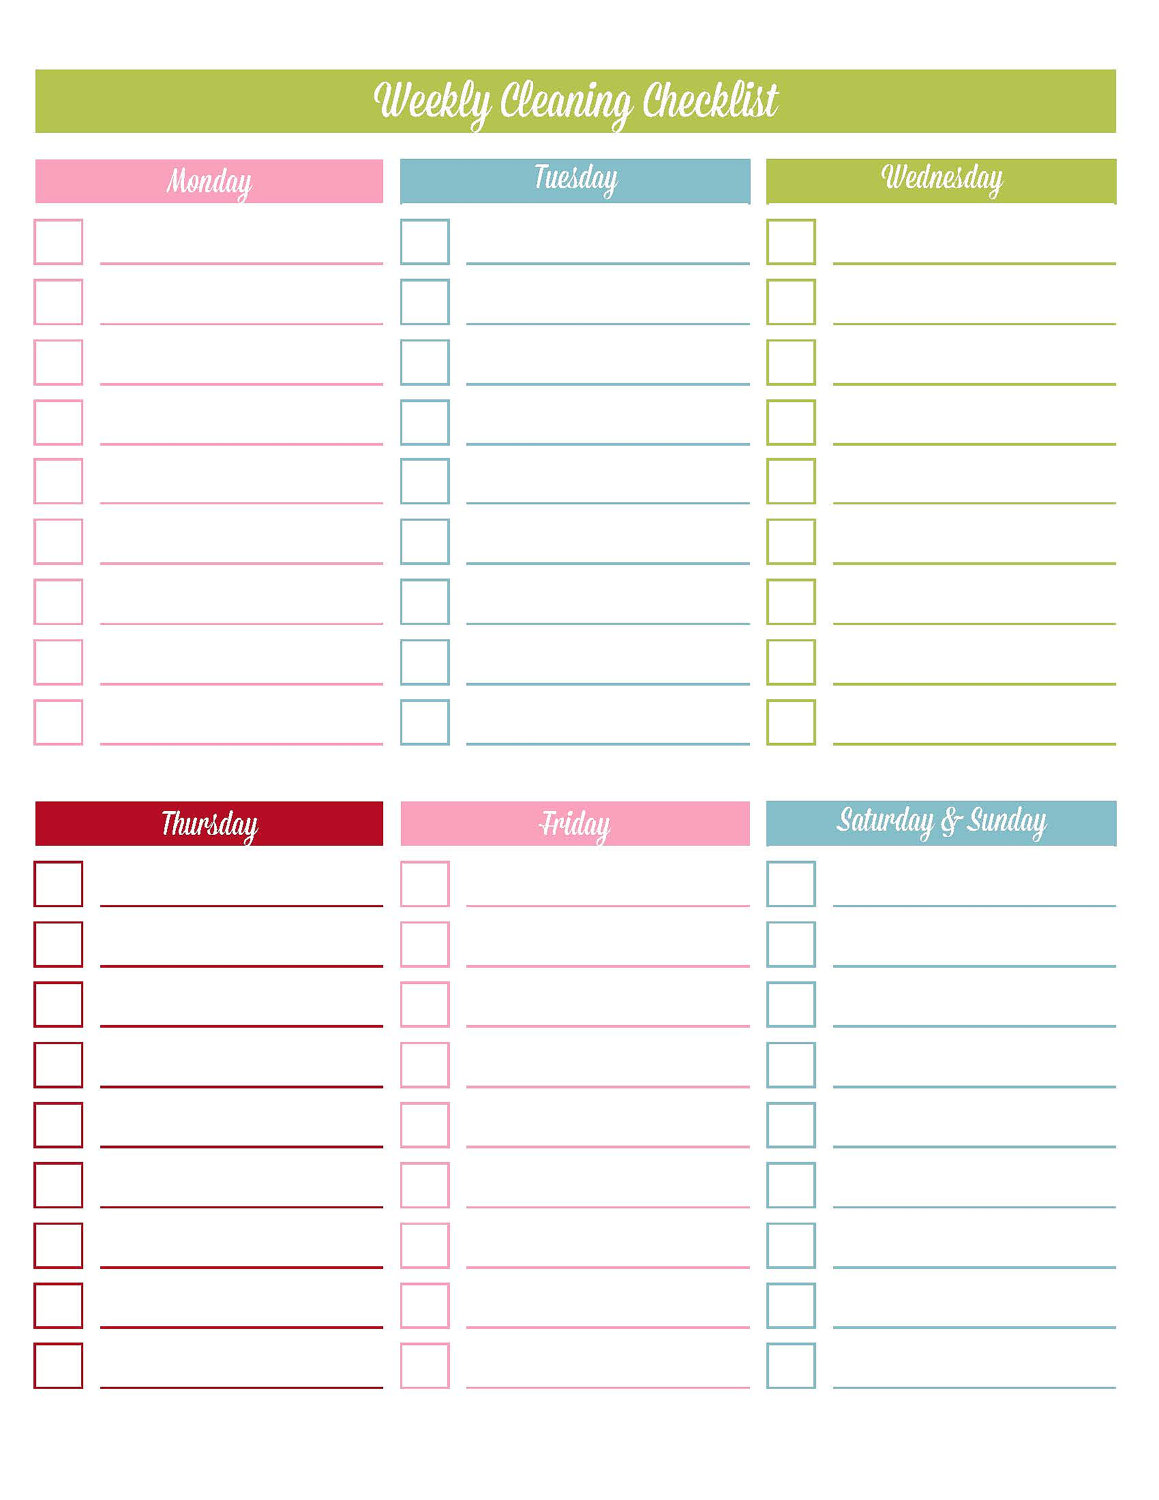 6-best-images-of-to-do-list-printable-editable-template-editable-to